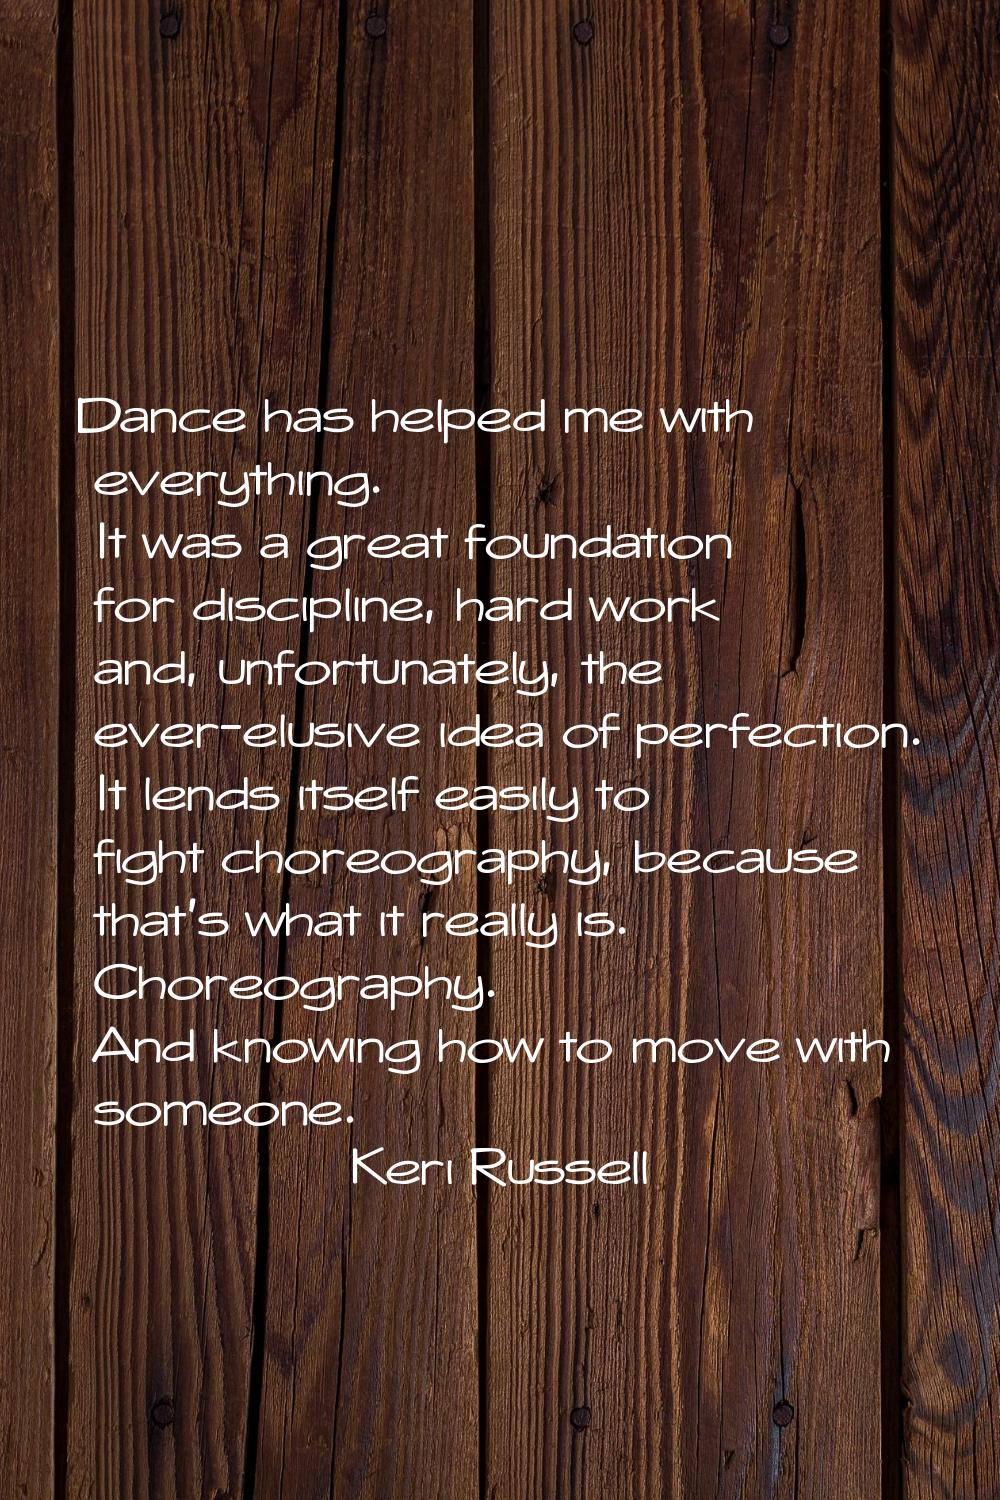 Dance has helped me with everything. It was a great foundation for discipline, hard work and, unfor